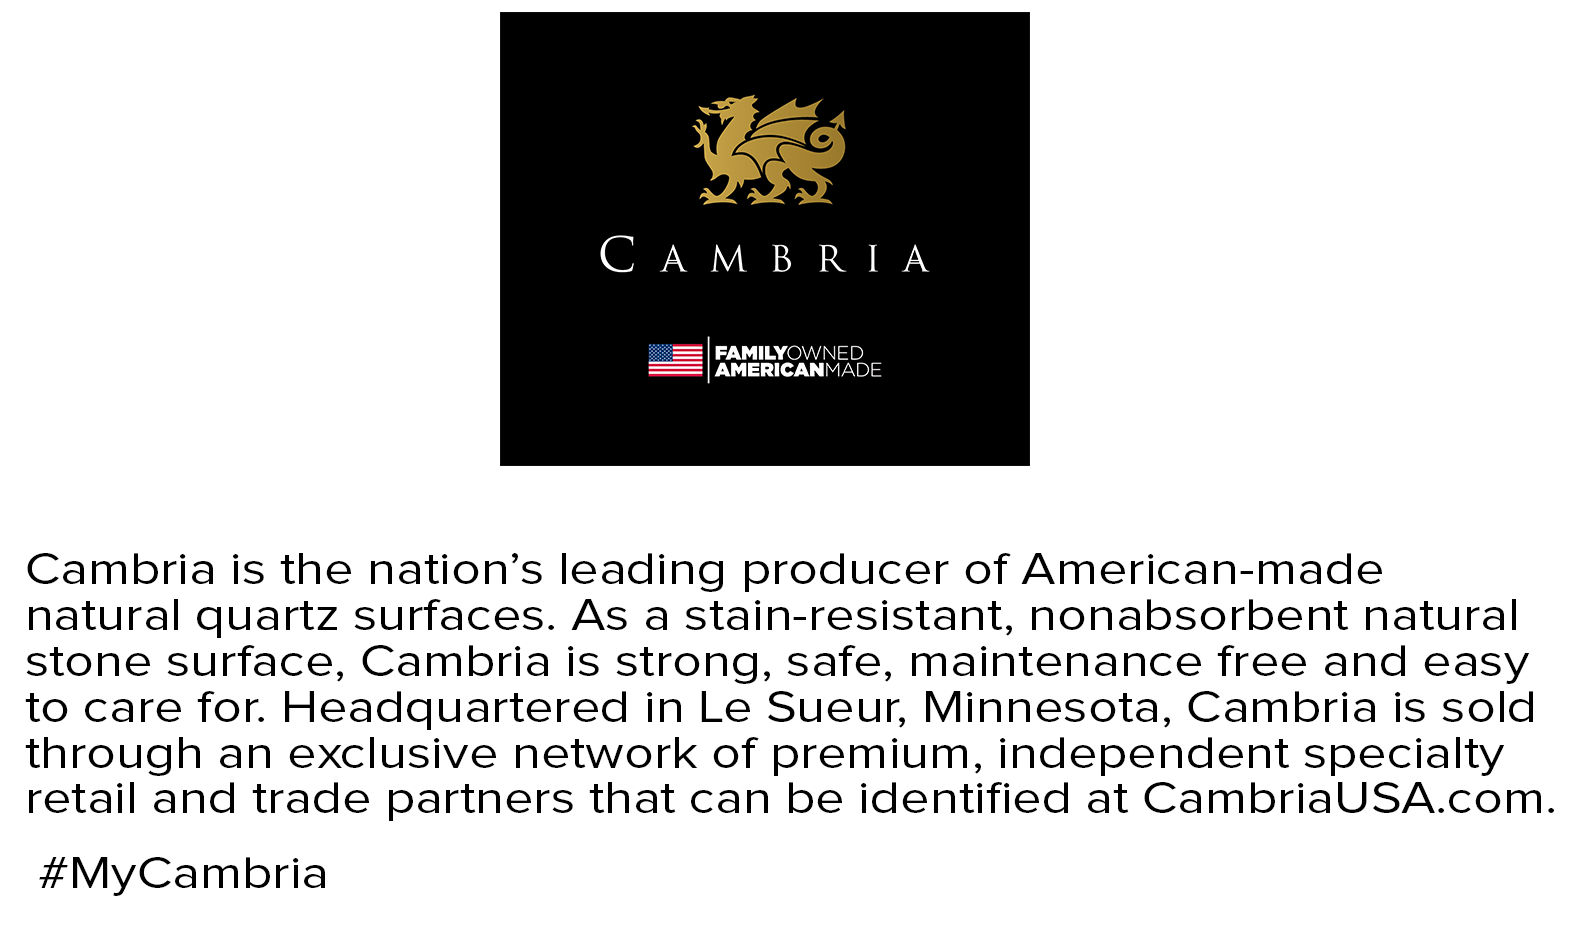 https://www.cambriausa.com/playingforchange